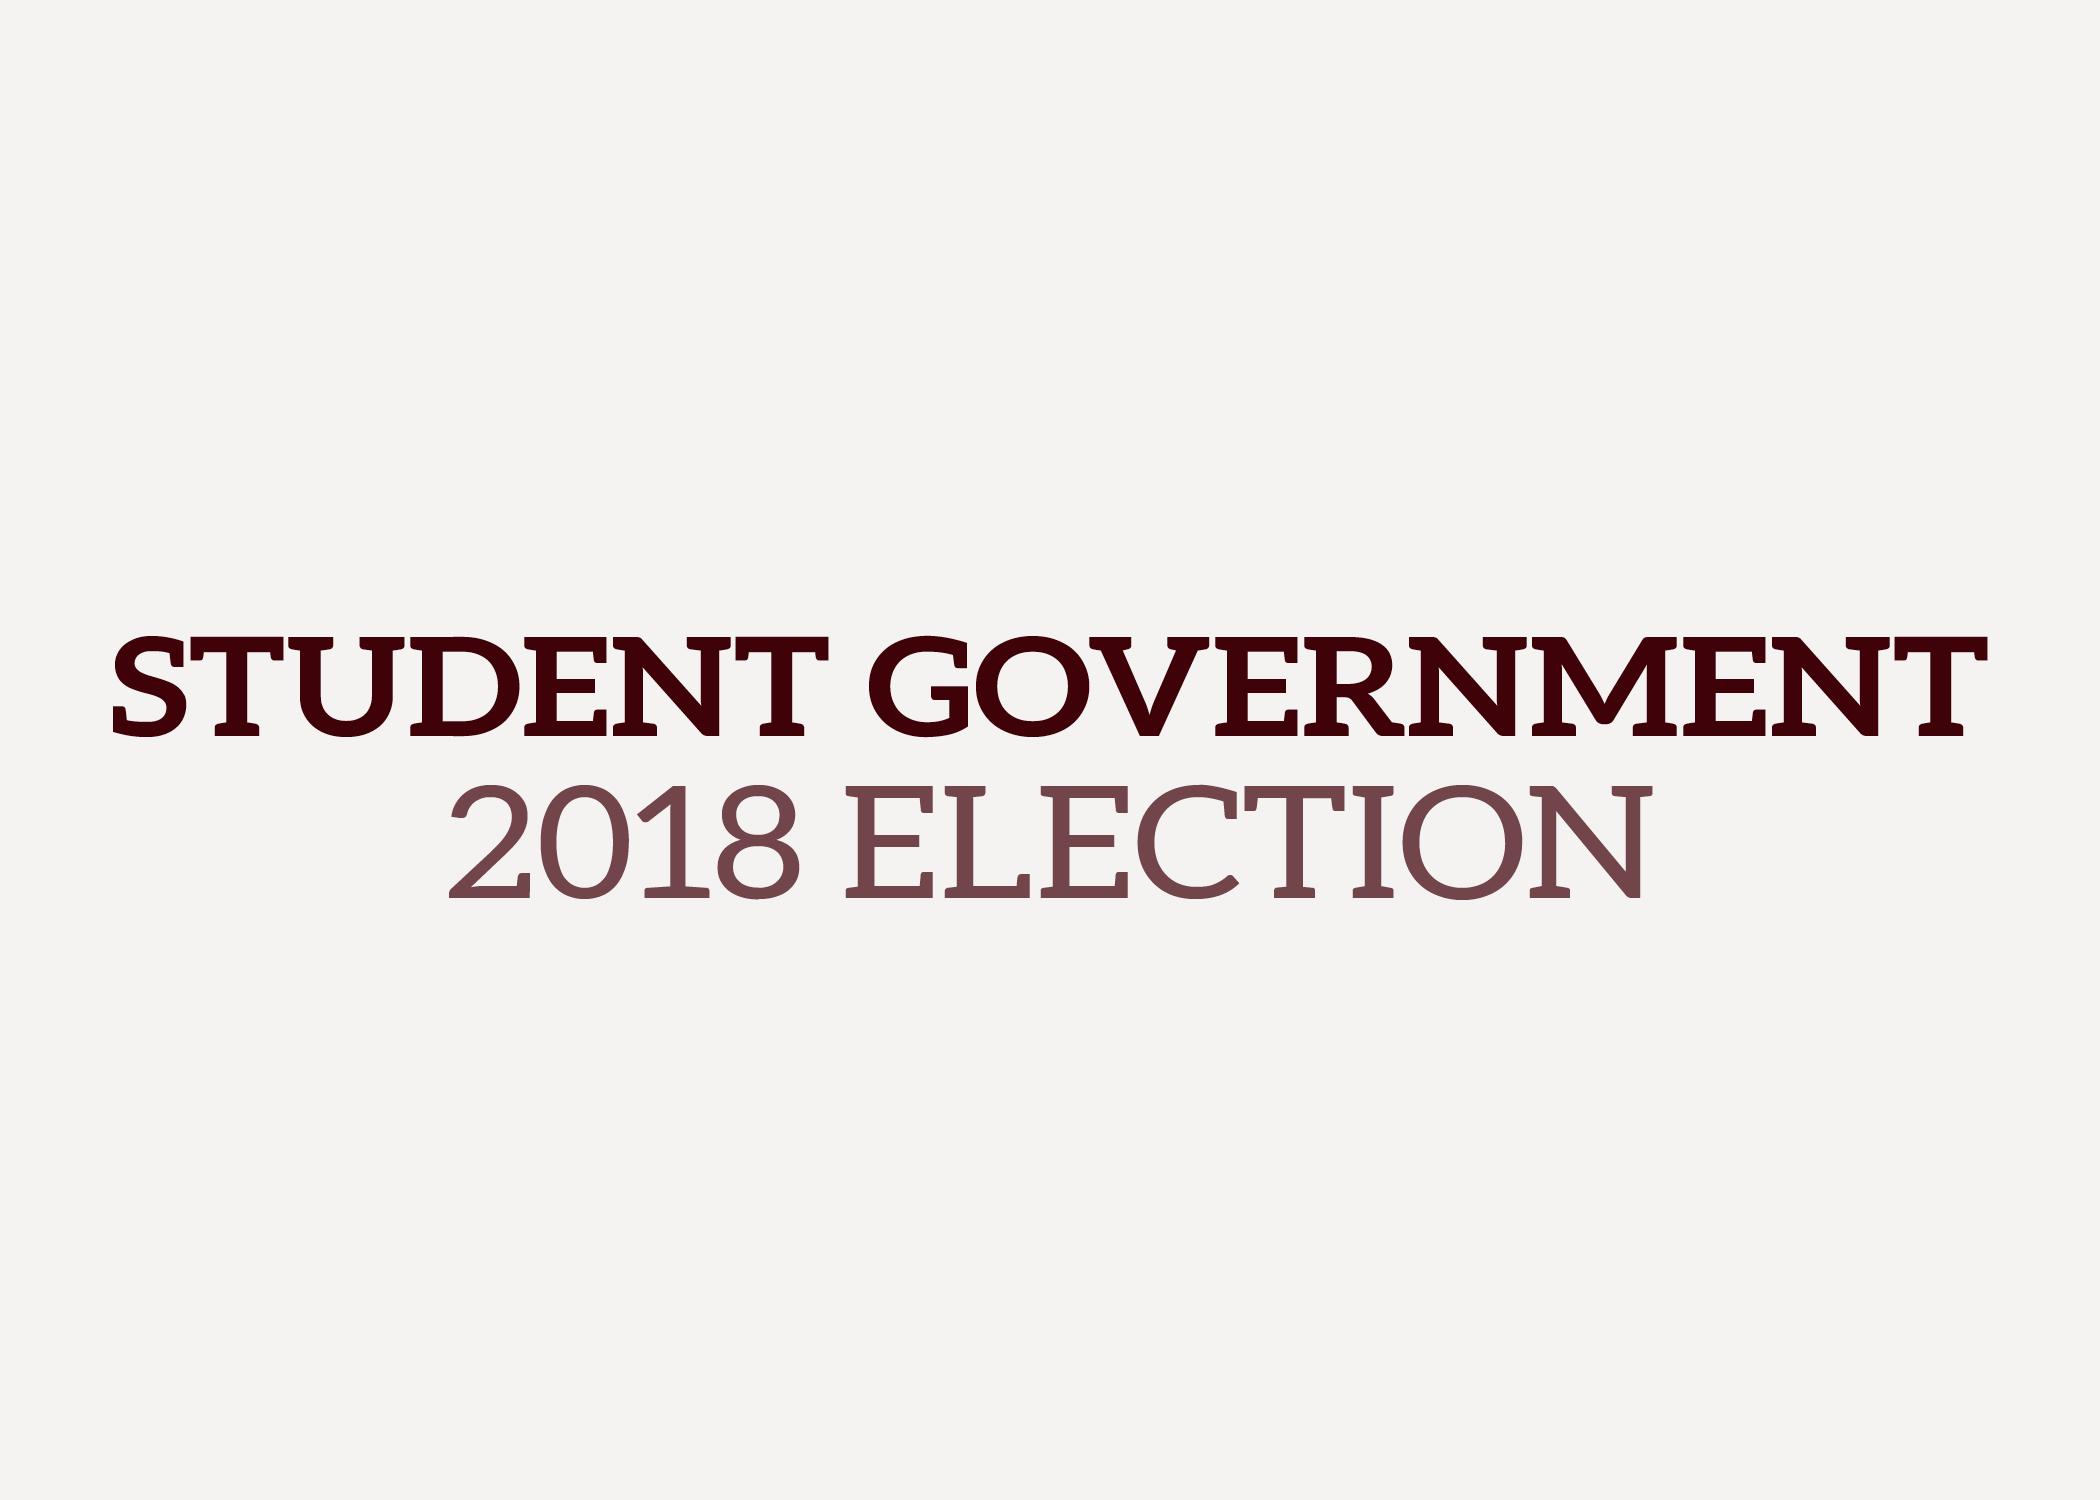 Campaigns+emerge+as+Student+Government+elections+approach